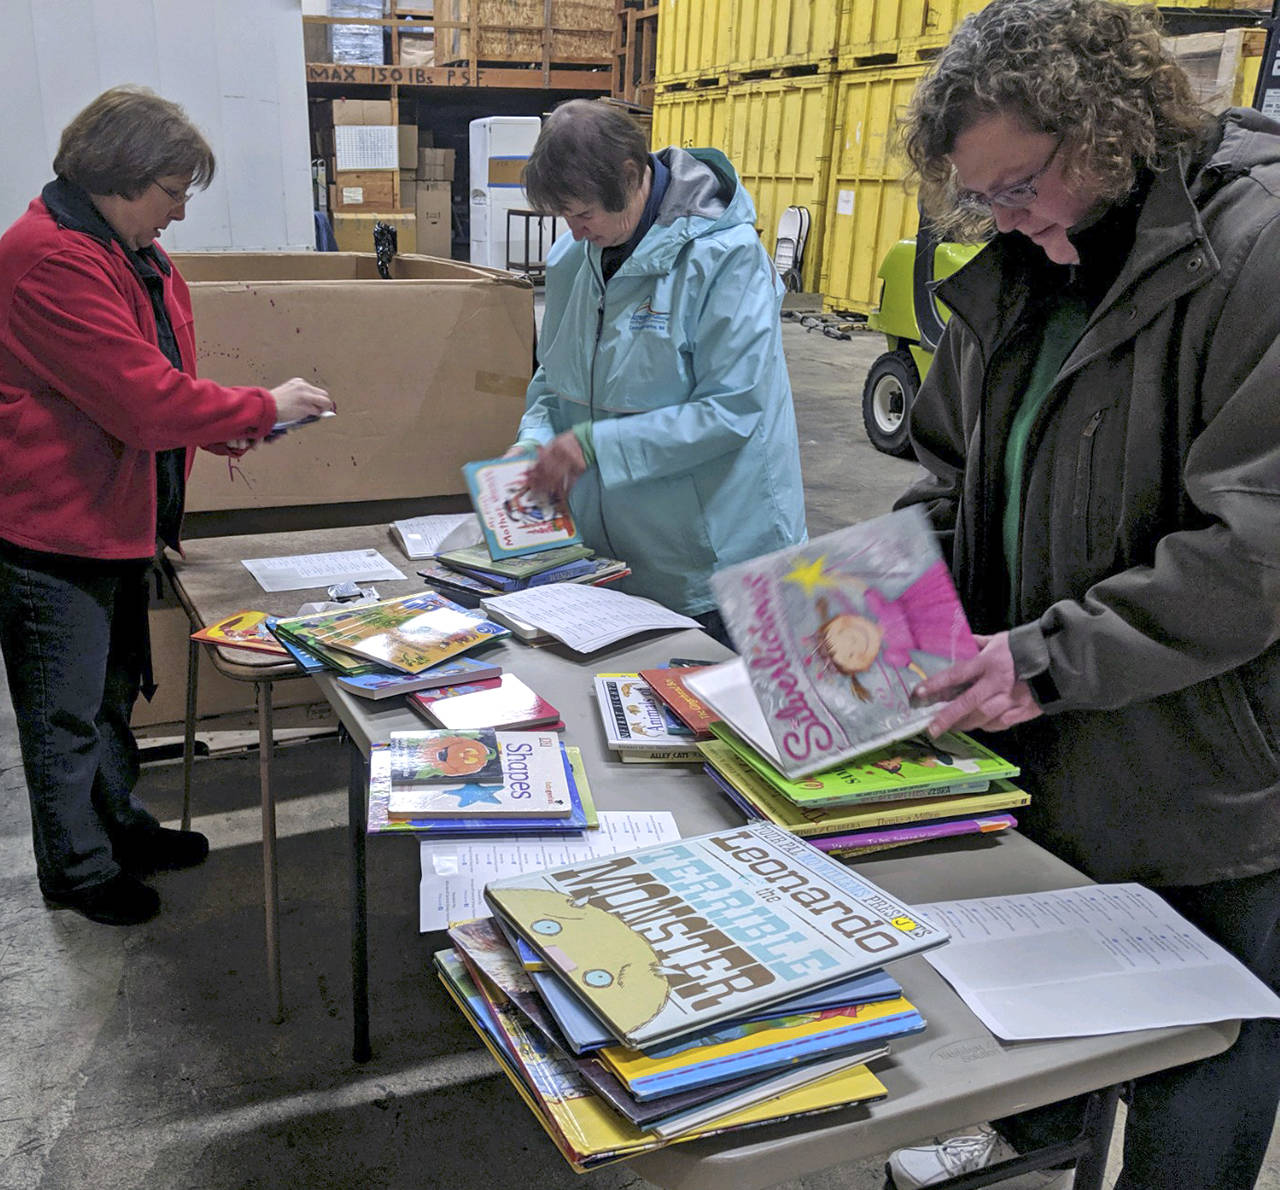 Courtesy photo                                From left, Annette Biornstad, Jennifer Roetcisoen and Joan Julius review and label books for Altrusa International of Central Grays Harbor’s Little Red Book Shelf Project. The service organization places children’s books all over the Harbor for families to take home and read. (Current locations include Grays Harbor Community Hospital, the Domestic Violence Center of Grays Harbor, and the Grays Harbor County Public Health & Social Services Department offices.) The Altrusa International Foundation recently awarded a $2,000 grant to the local group to purchase shelves and over 1,700 new and used books.